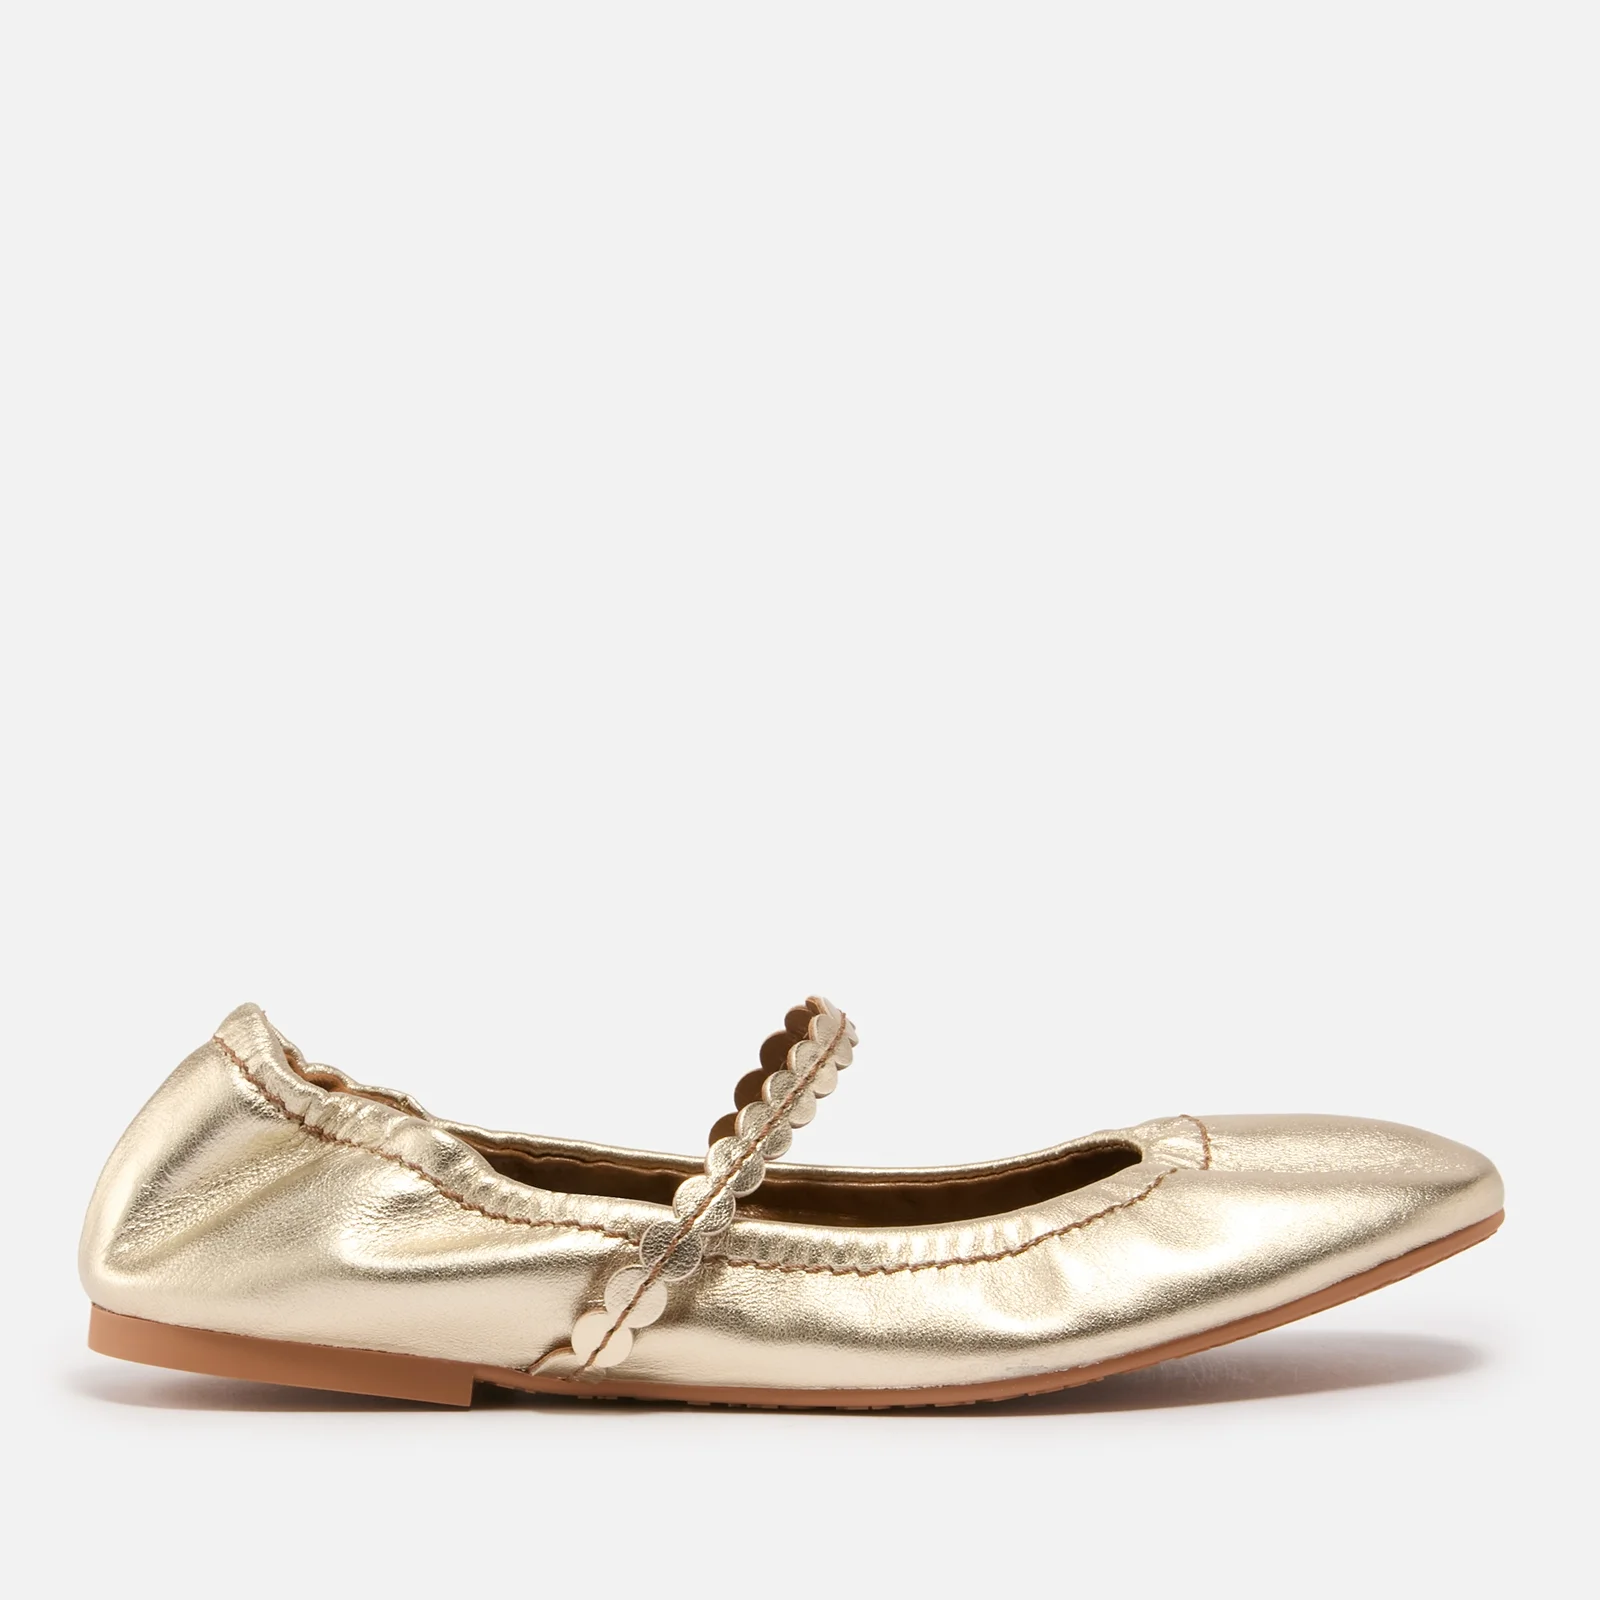 See By Chloé Women's Kaddy Leather Ballet Flats Image 1